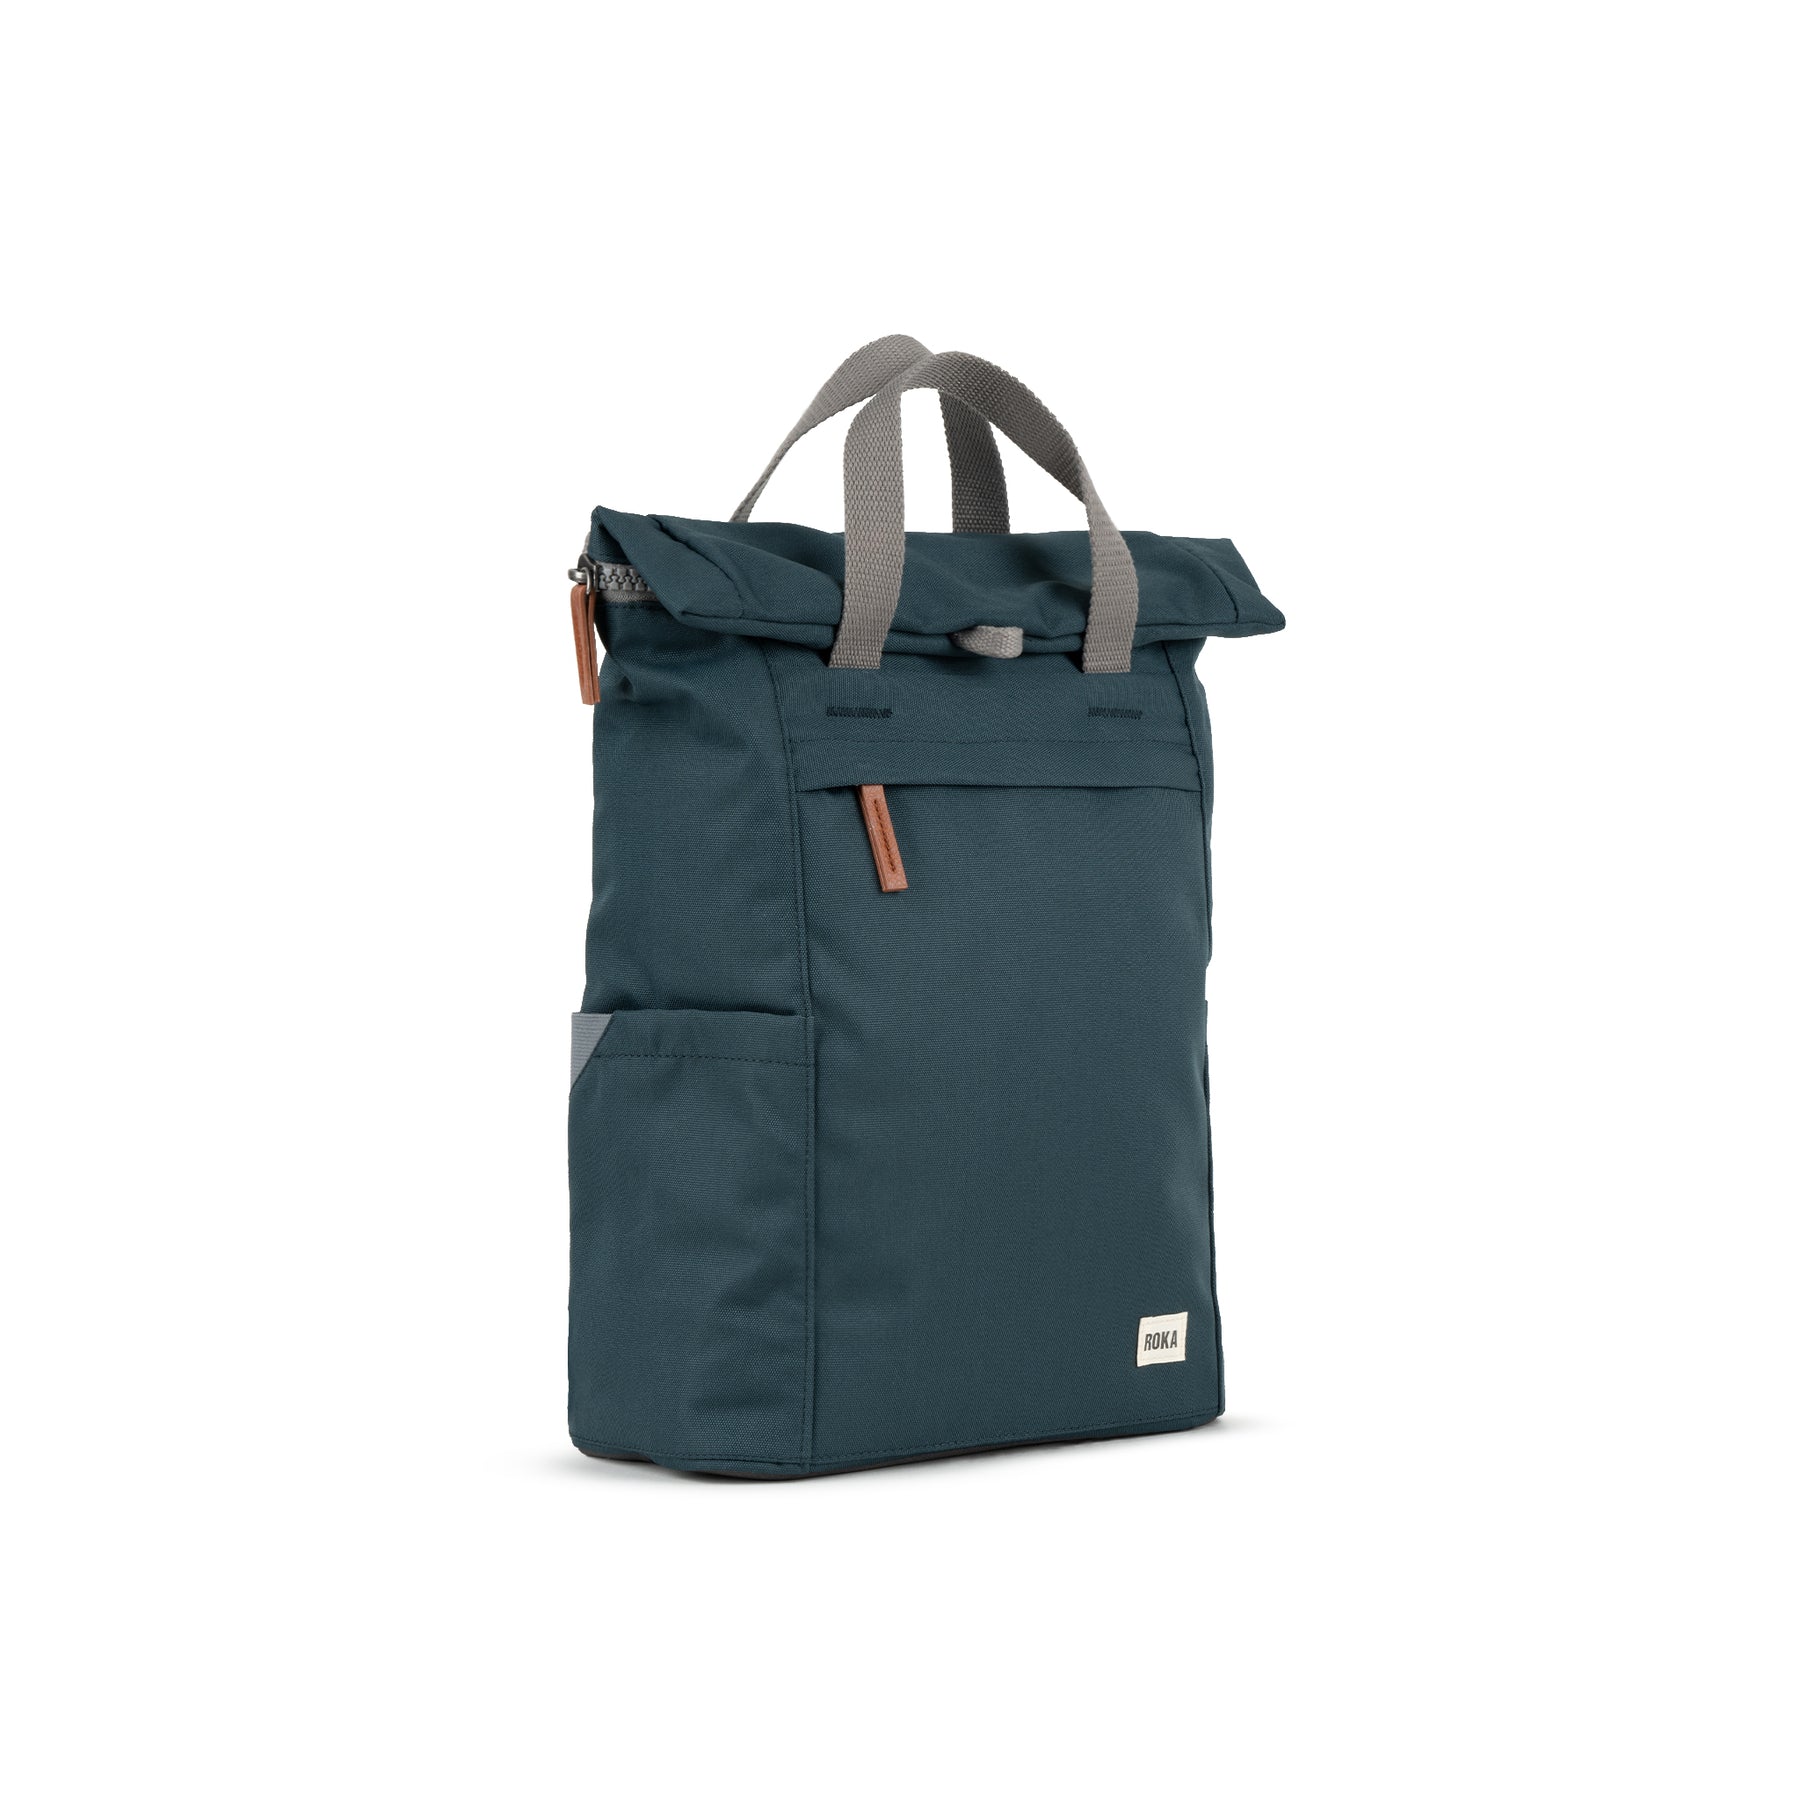 ROKA Finchley A Smoke Large Recycled Canvas Bag - OS